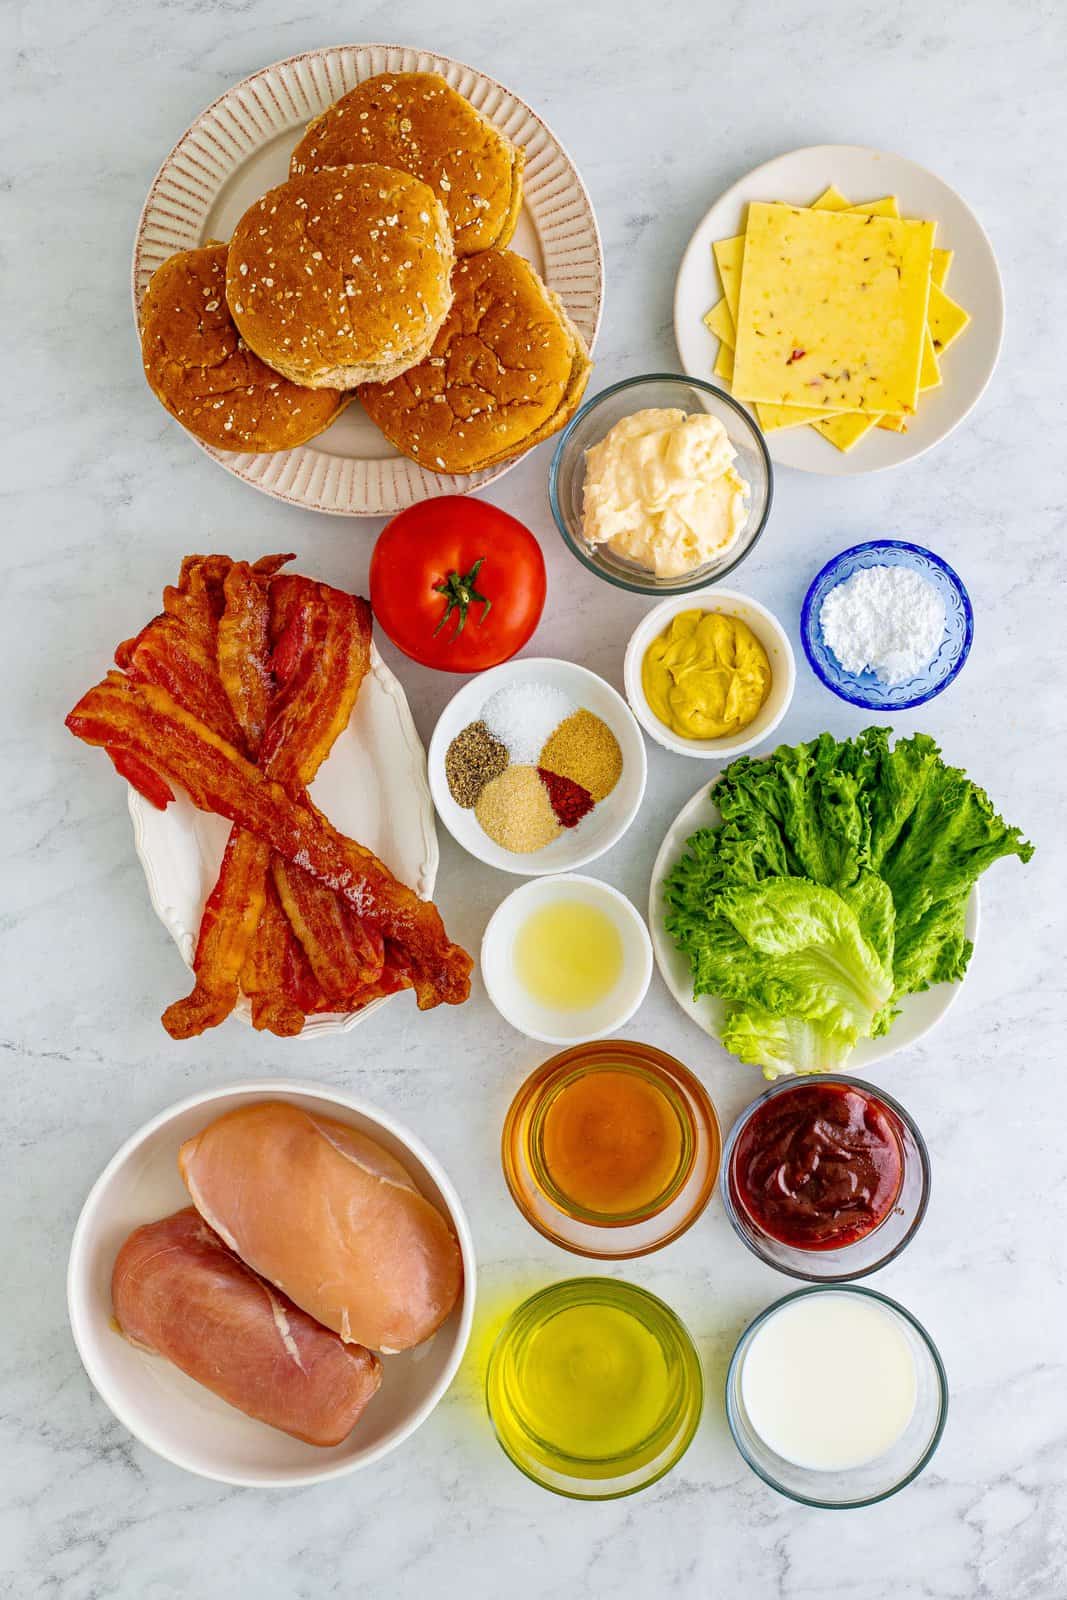 Ingredients needed: chicken breasts, dill pickle juice, whole milk, powdered sugar, garlic powder, onion powder, pepper, kosher salt, smoked paprika, mayonnaise, sweet bbq sauce, honey, dijon mustard, lemon juice, pepper jack or colby jack cheese , multigrain buns, green leaf lettuce, beefsteak tomato slices and applewood smoked bacon.